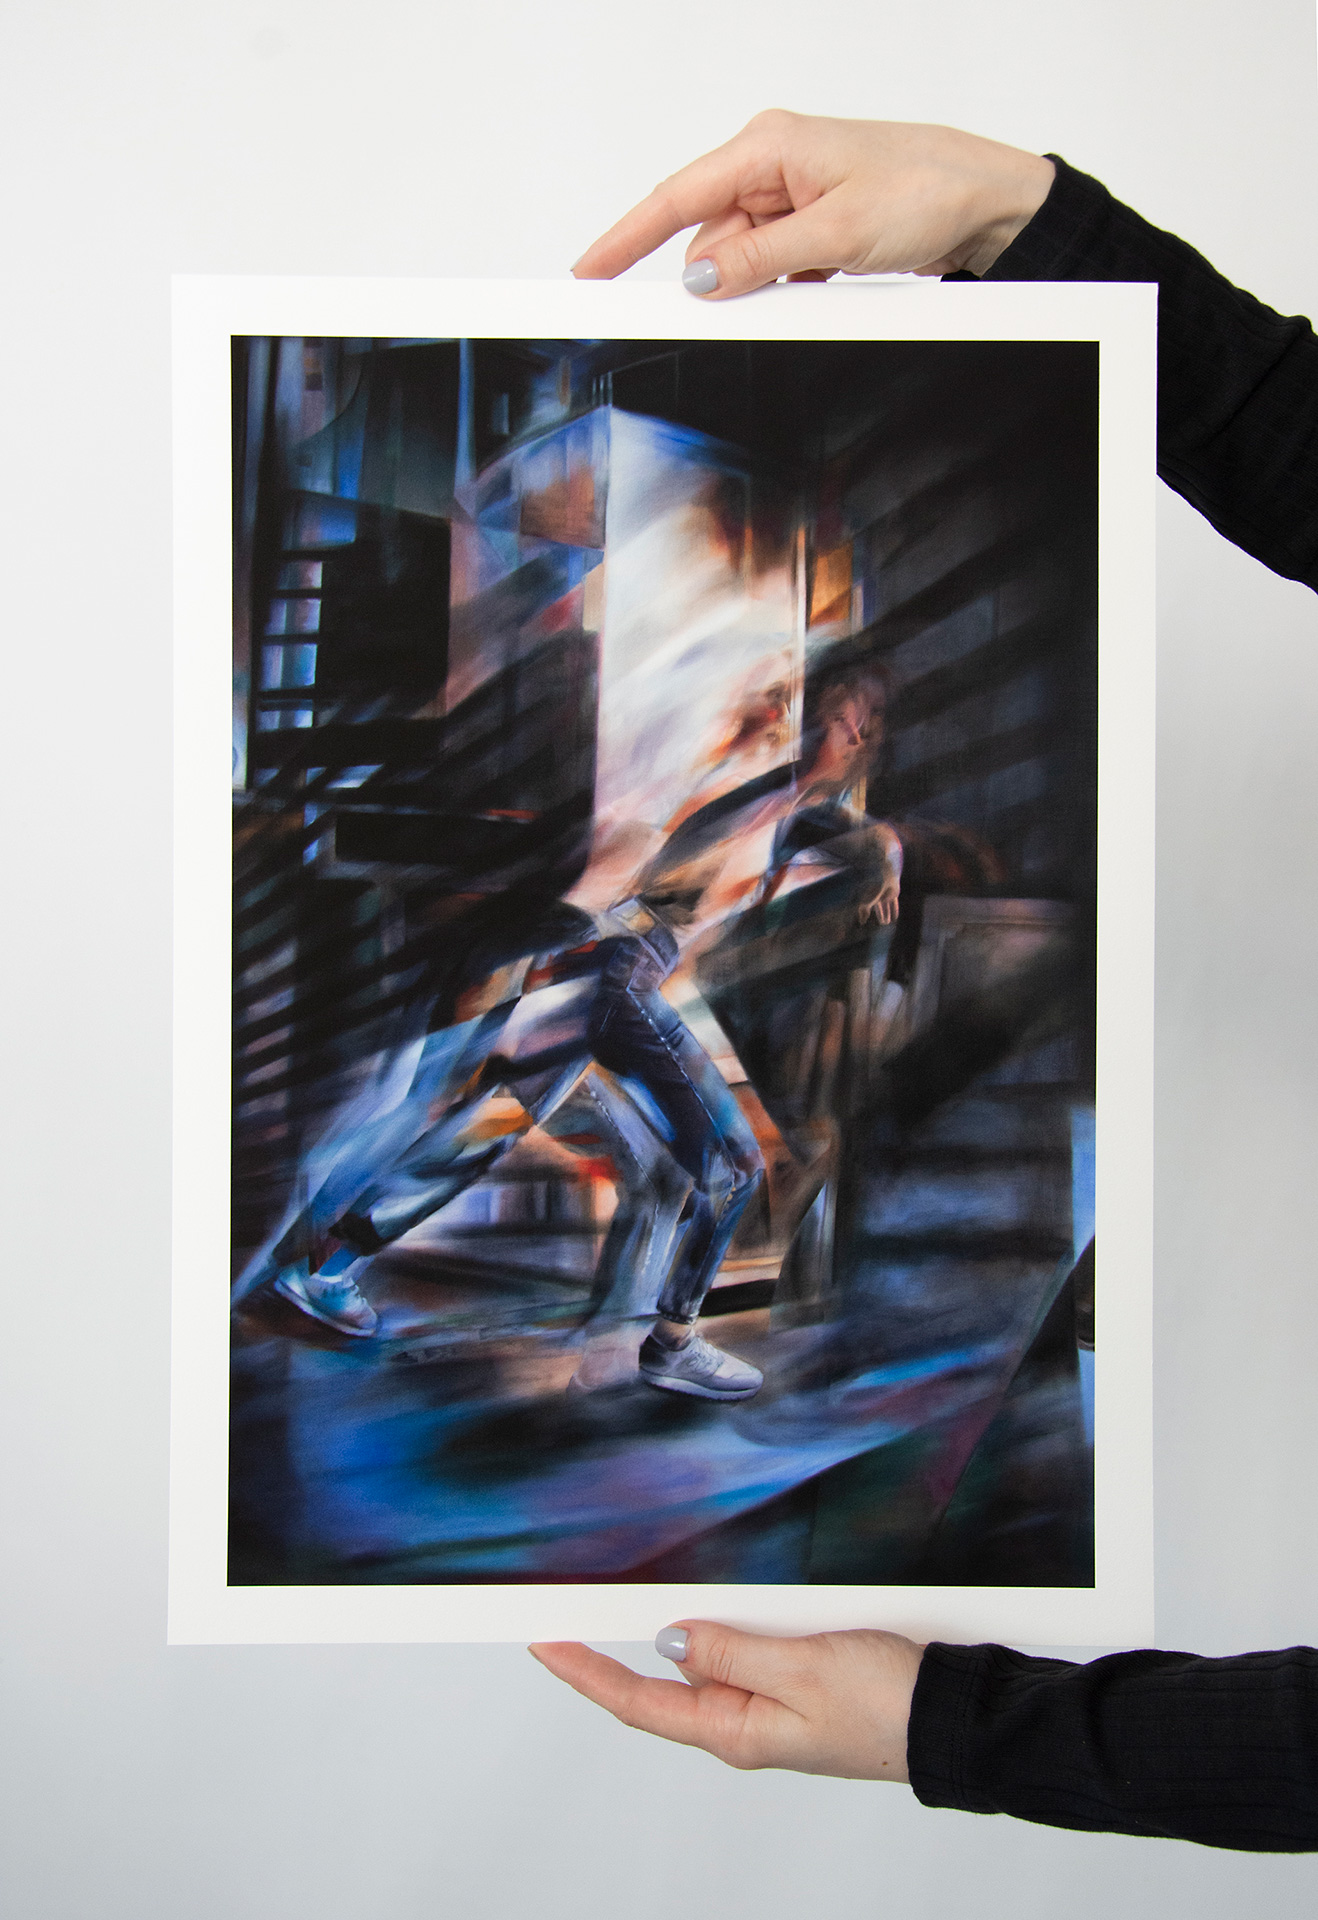 "Vortex 1" fine art print by Evelina Klanikova held in hand in front of a white wall, depicting an abstract representation of a running person with motion blur effects in shades of blue and green.